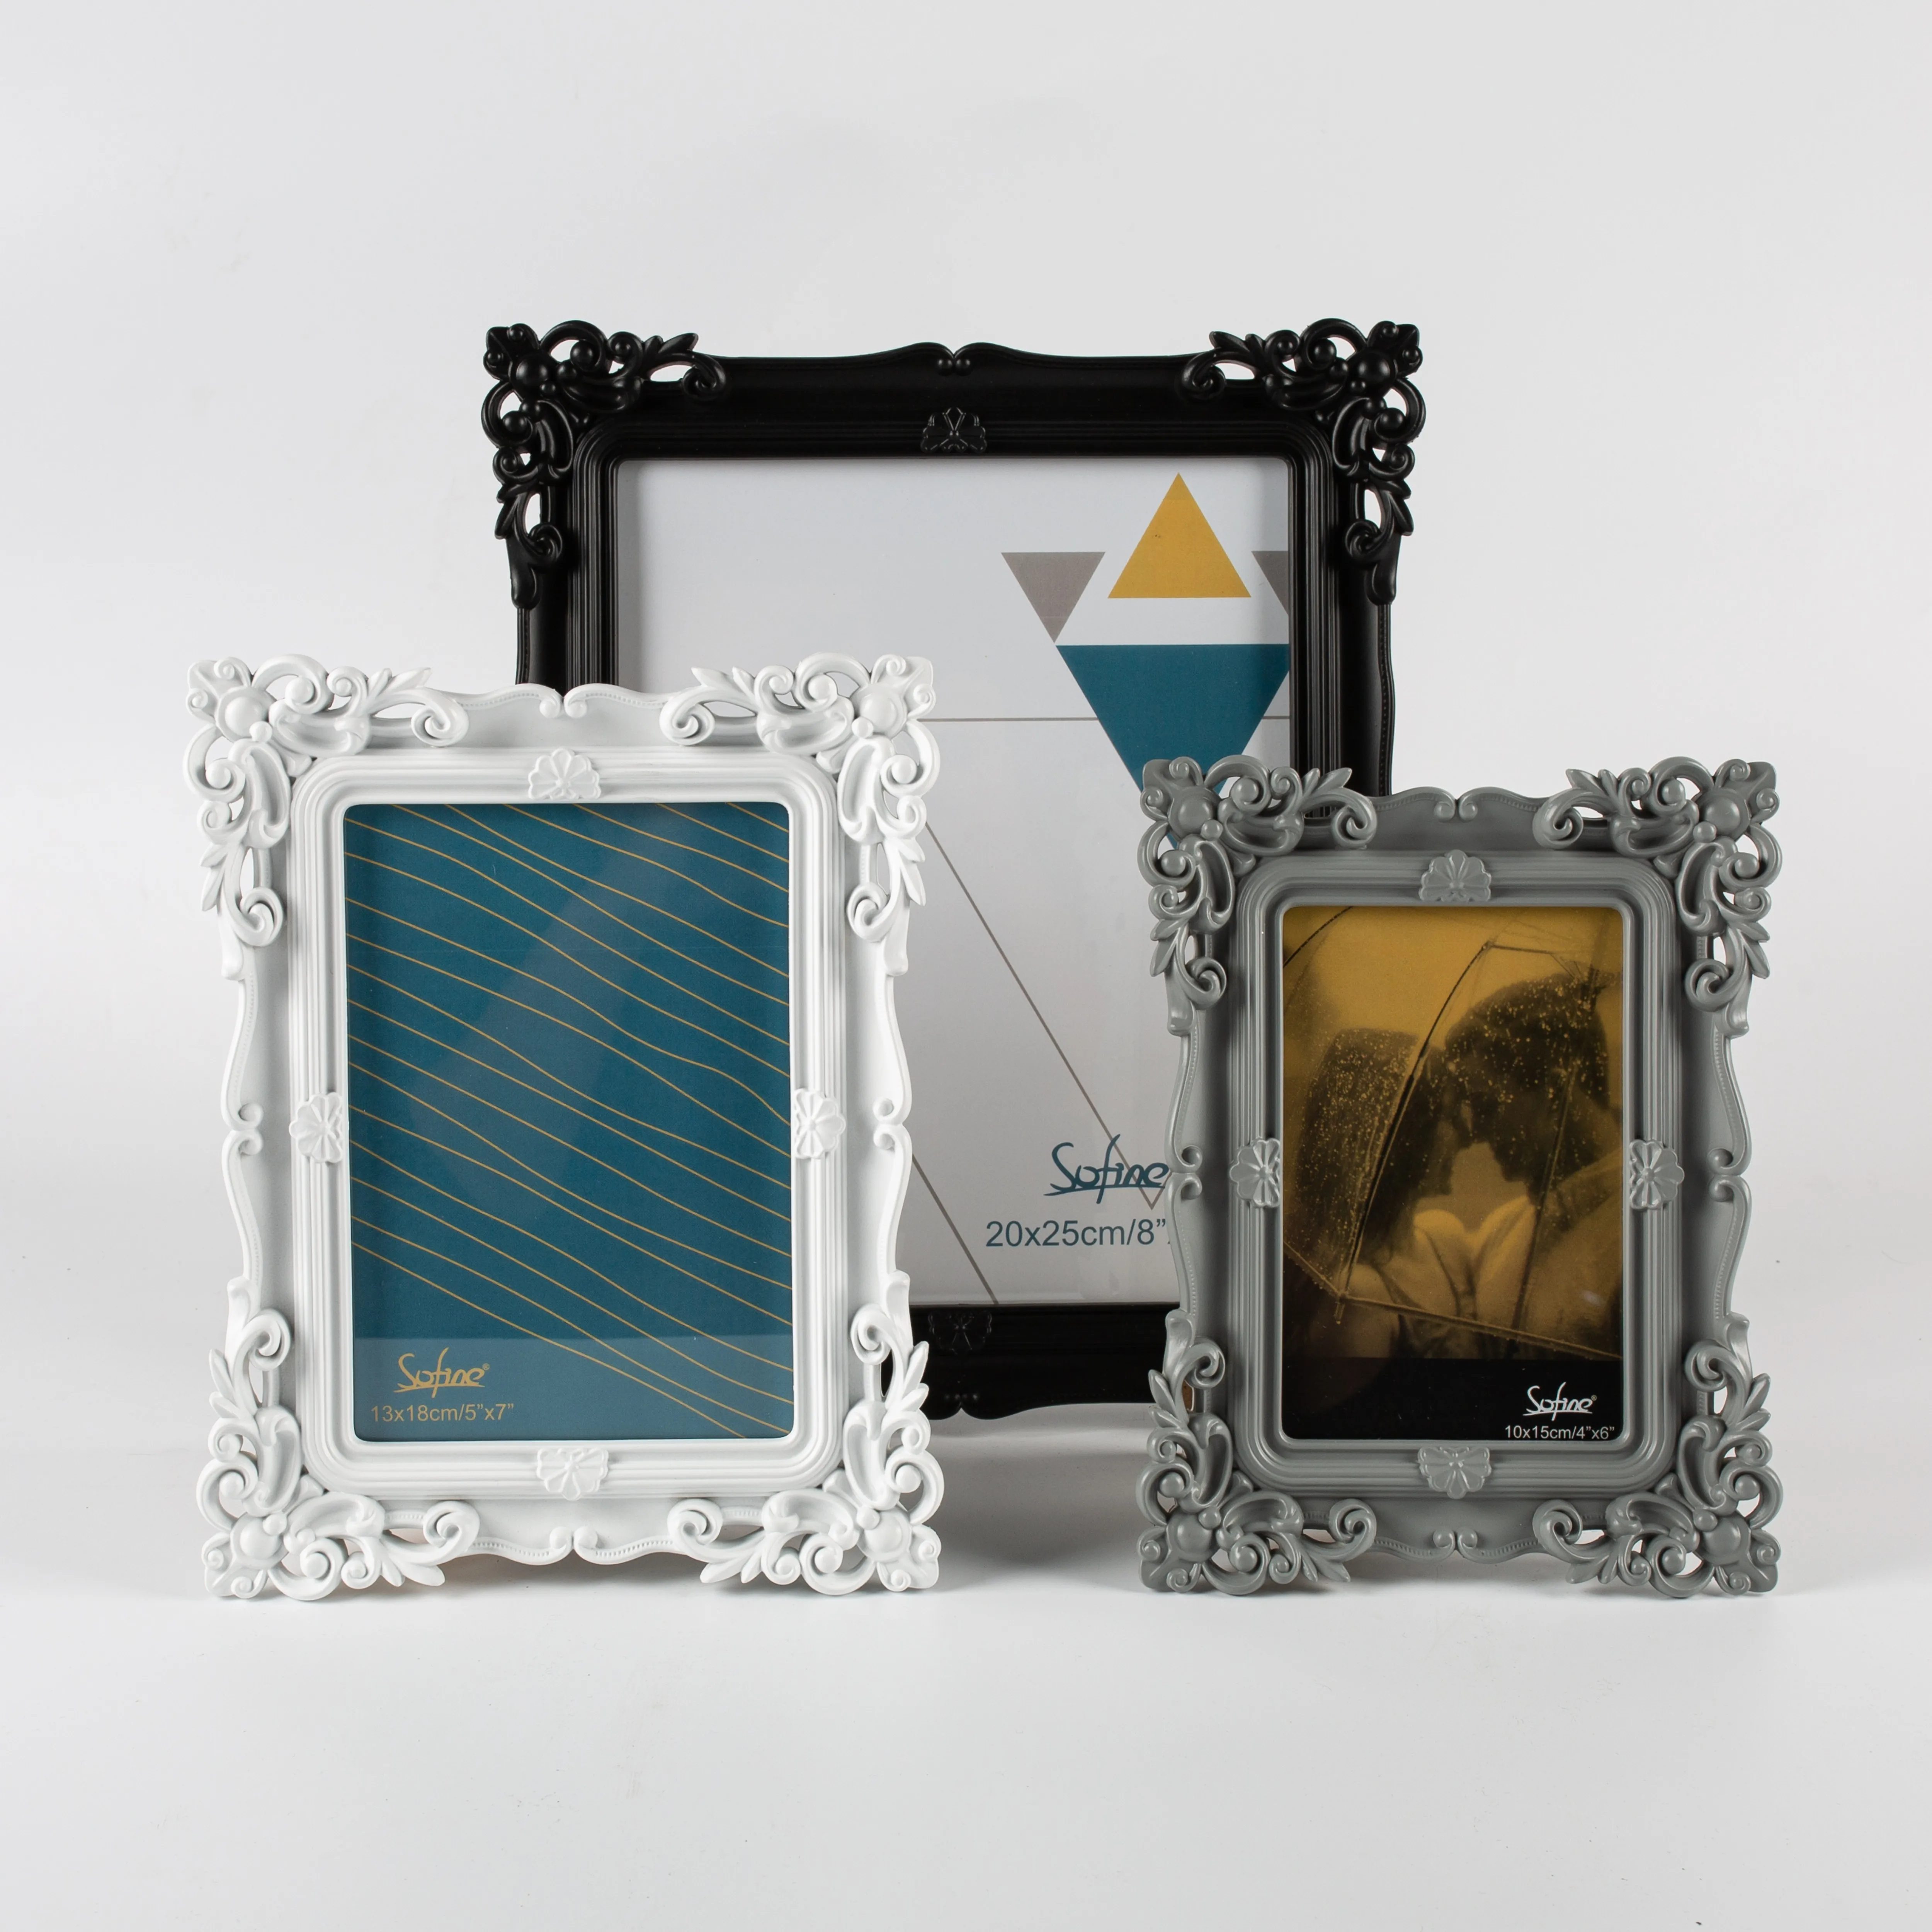 Sofine Modern Home Decoration Photo Fram Mini Funny Plastic 4x6 Photo Frame Fotolijst - Buy Clear Plastic Photo Frames 4x6,Good Price Frame,Home Decoration Picture Frame Product Alibaba.com